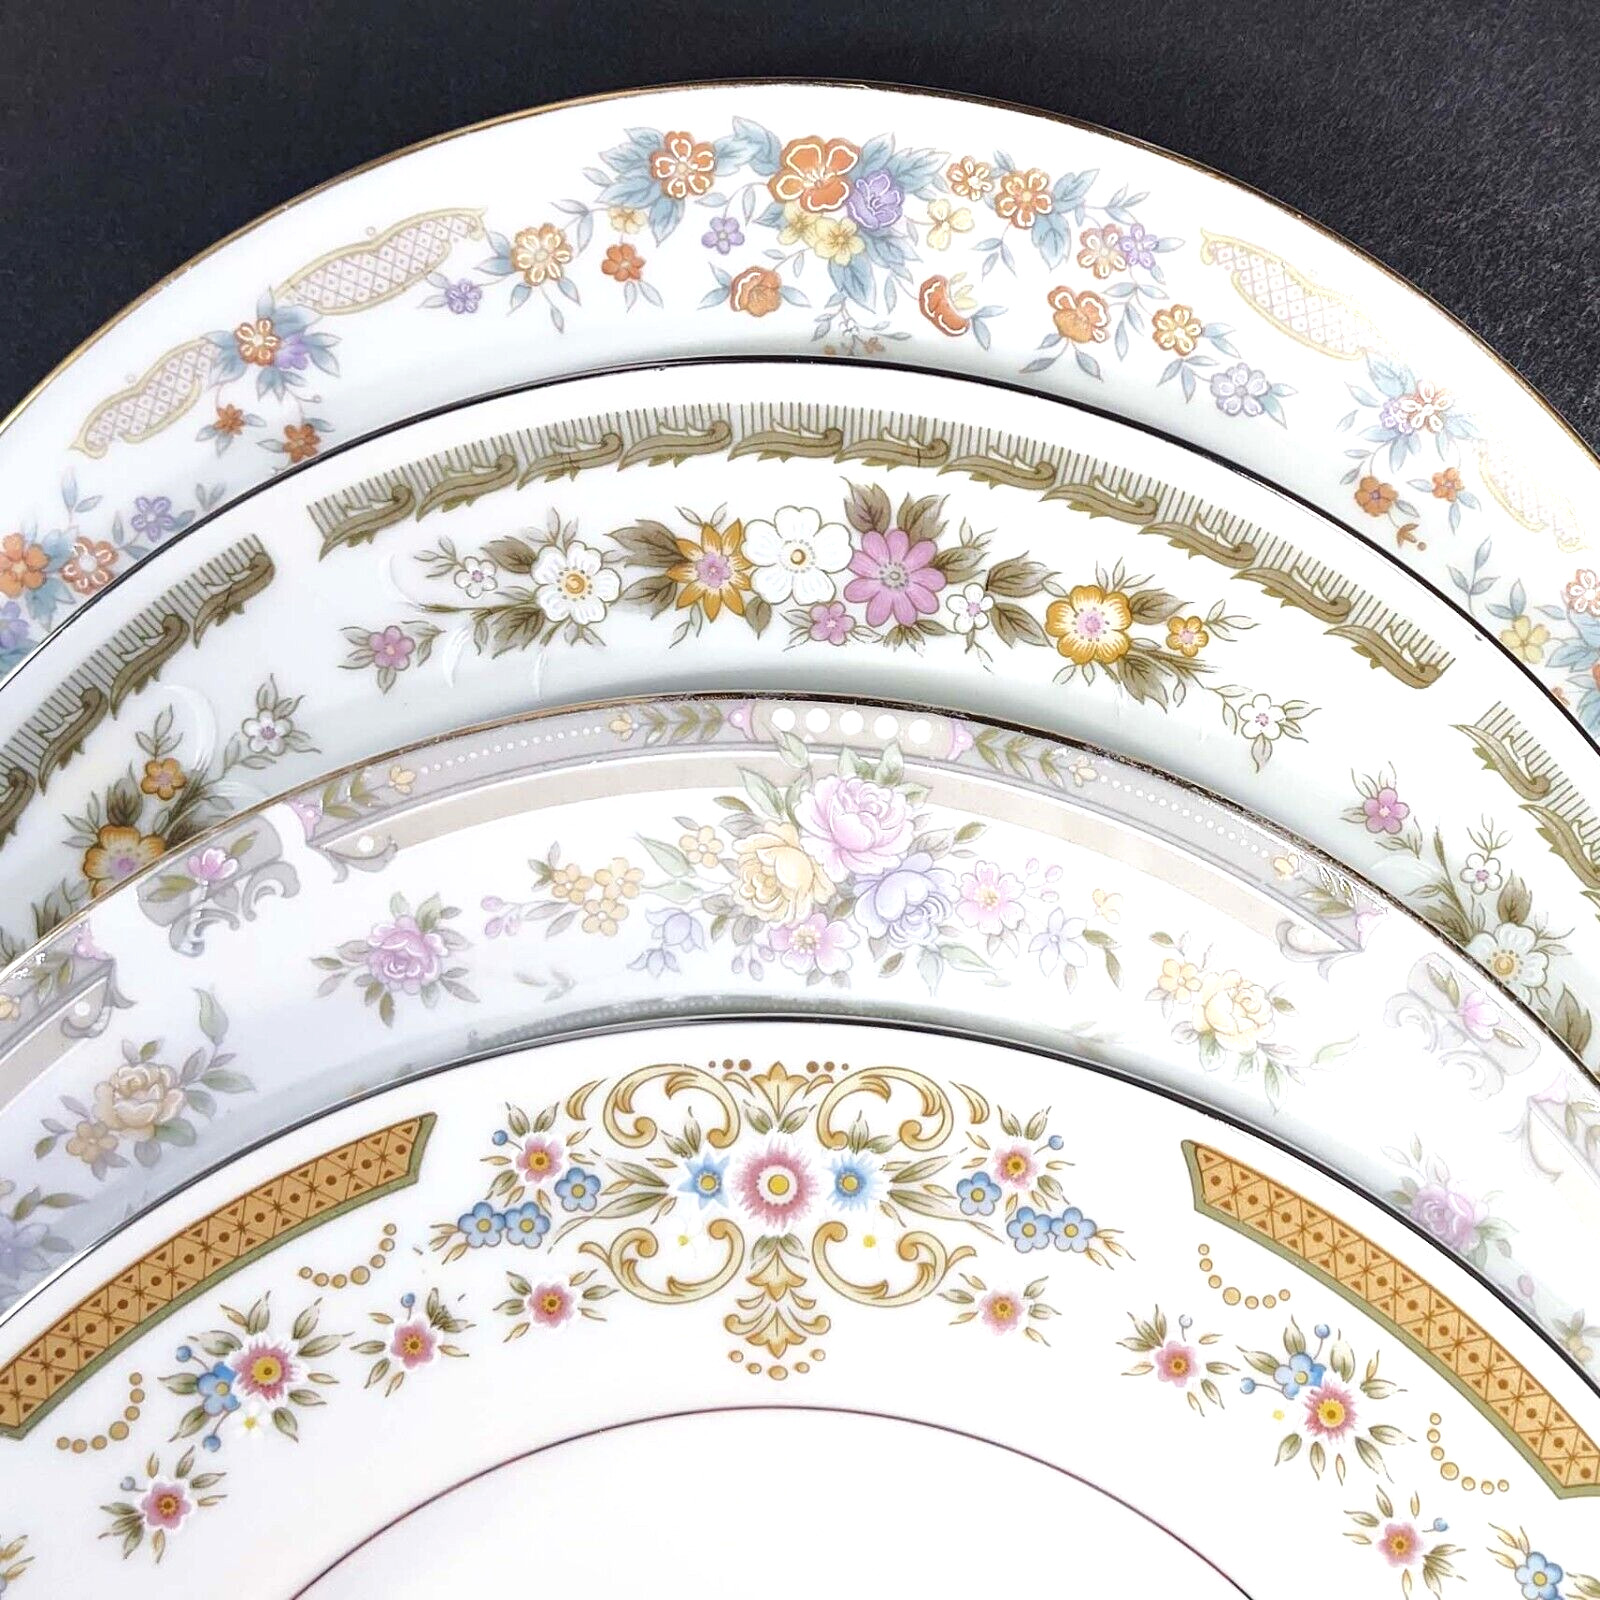 Mismatched Dinner Plates Vintage Floral China Plates Mix and Match Set of 4